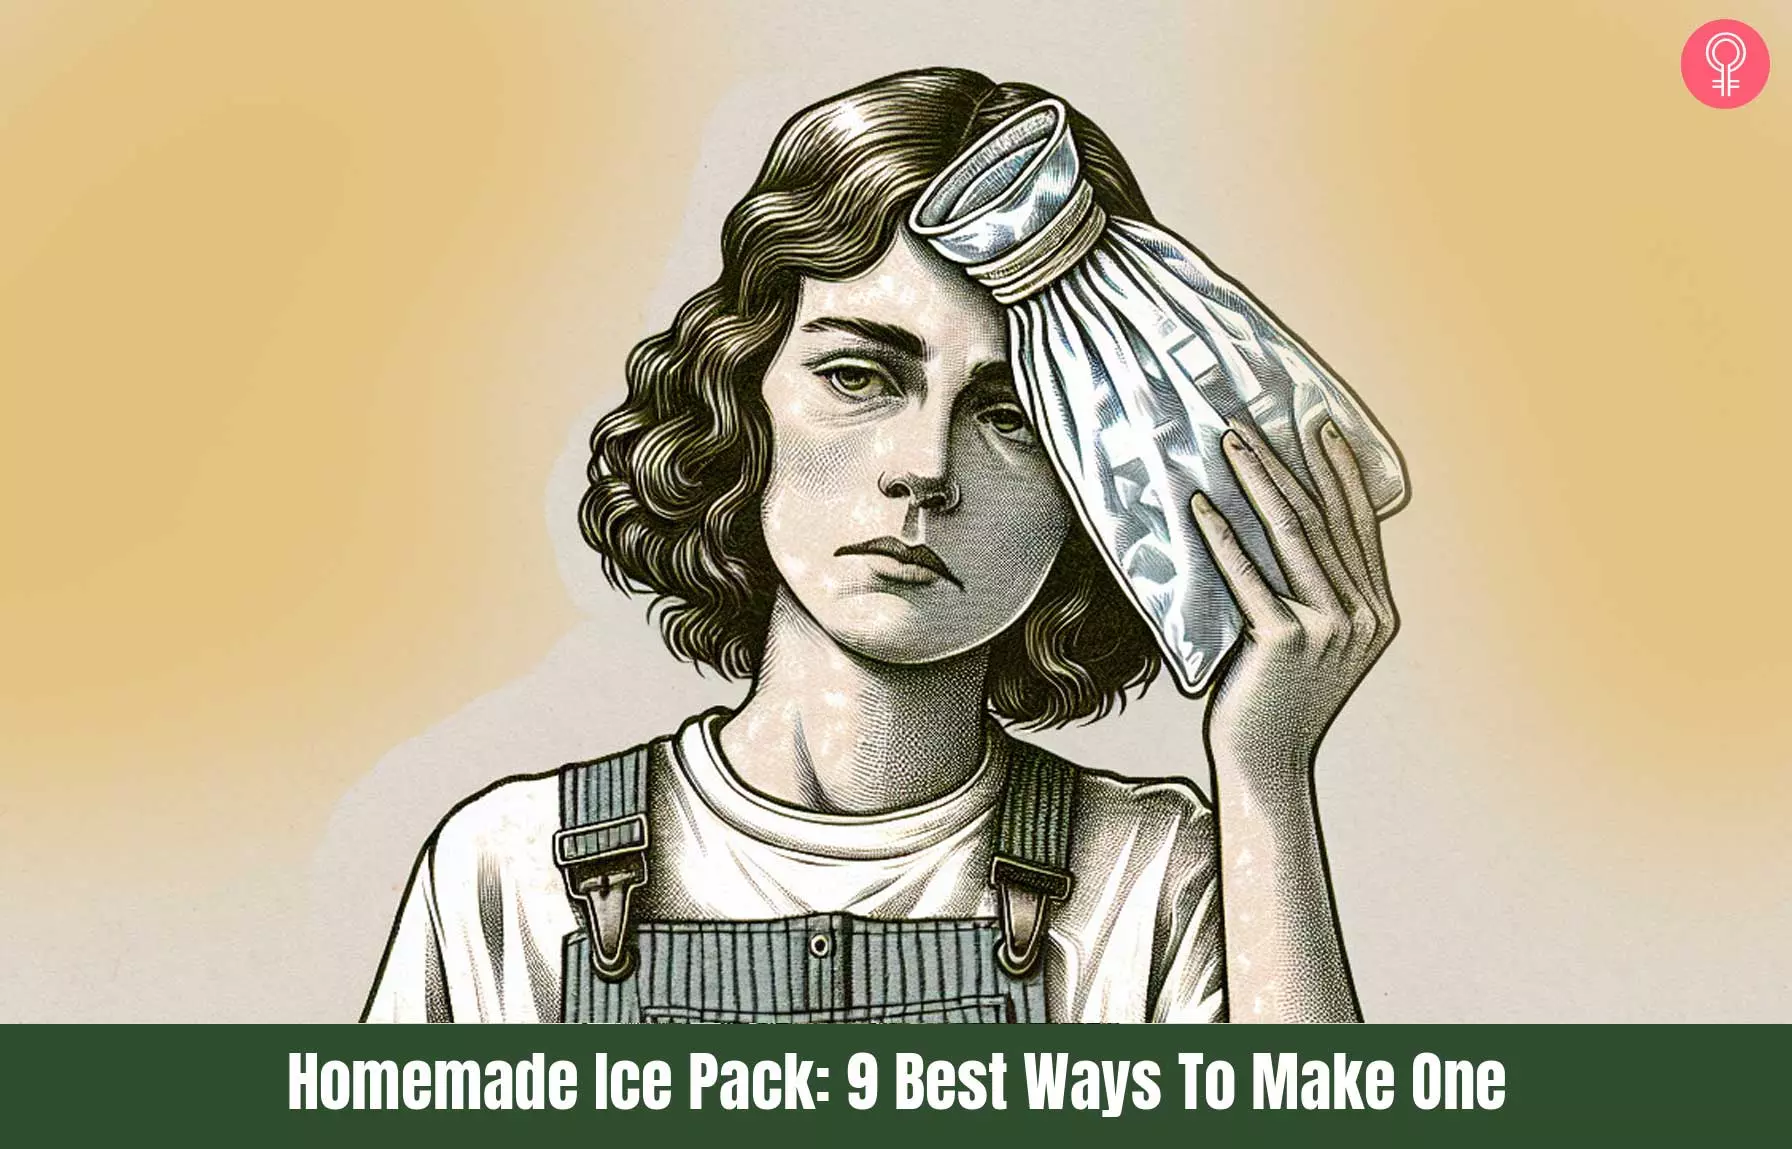 Homemade Ice Pack: 9 Best Ways To Make One